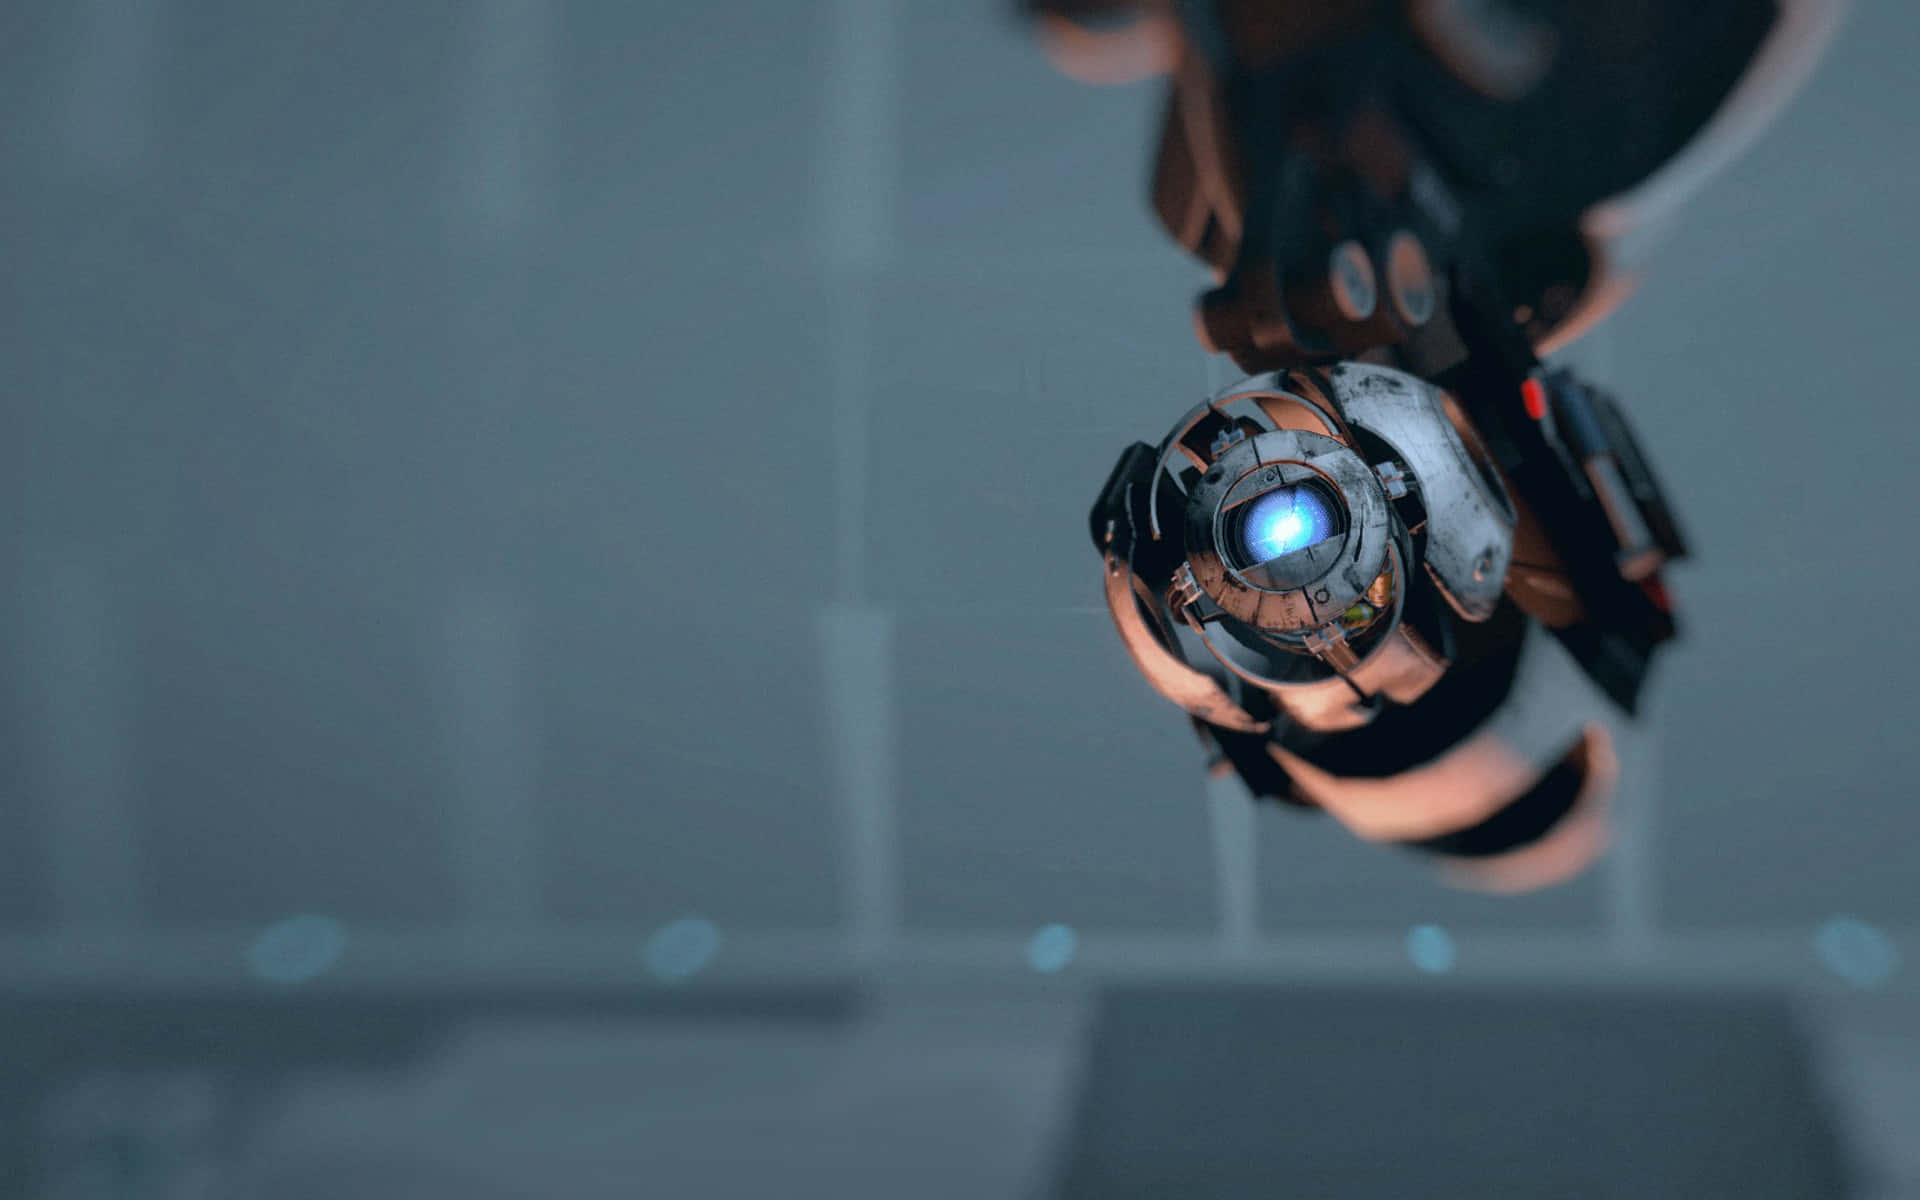 Enter the mysterious Aperture Science laboratories and go on a journey with Portal